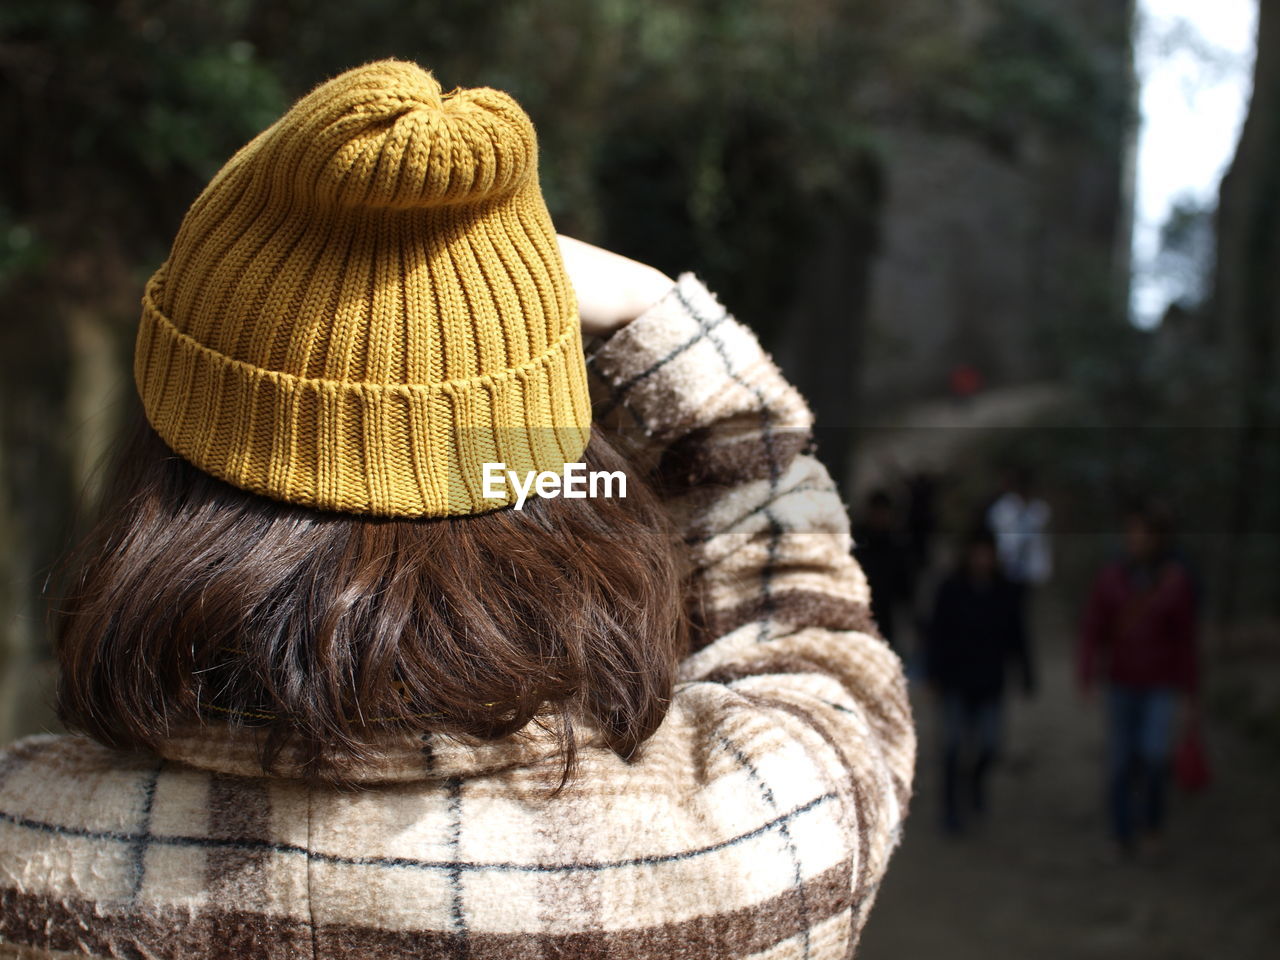 Rear view of woman with short brown hair wearing yellow knit hat standing at park